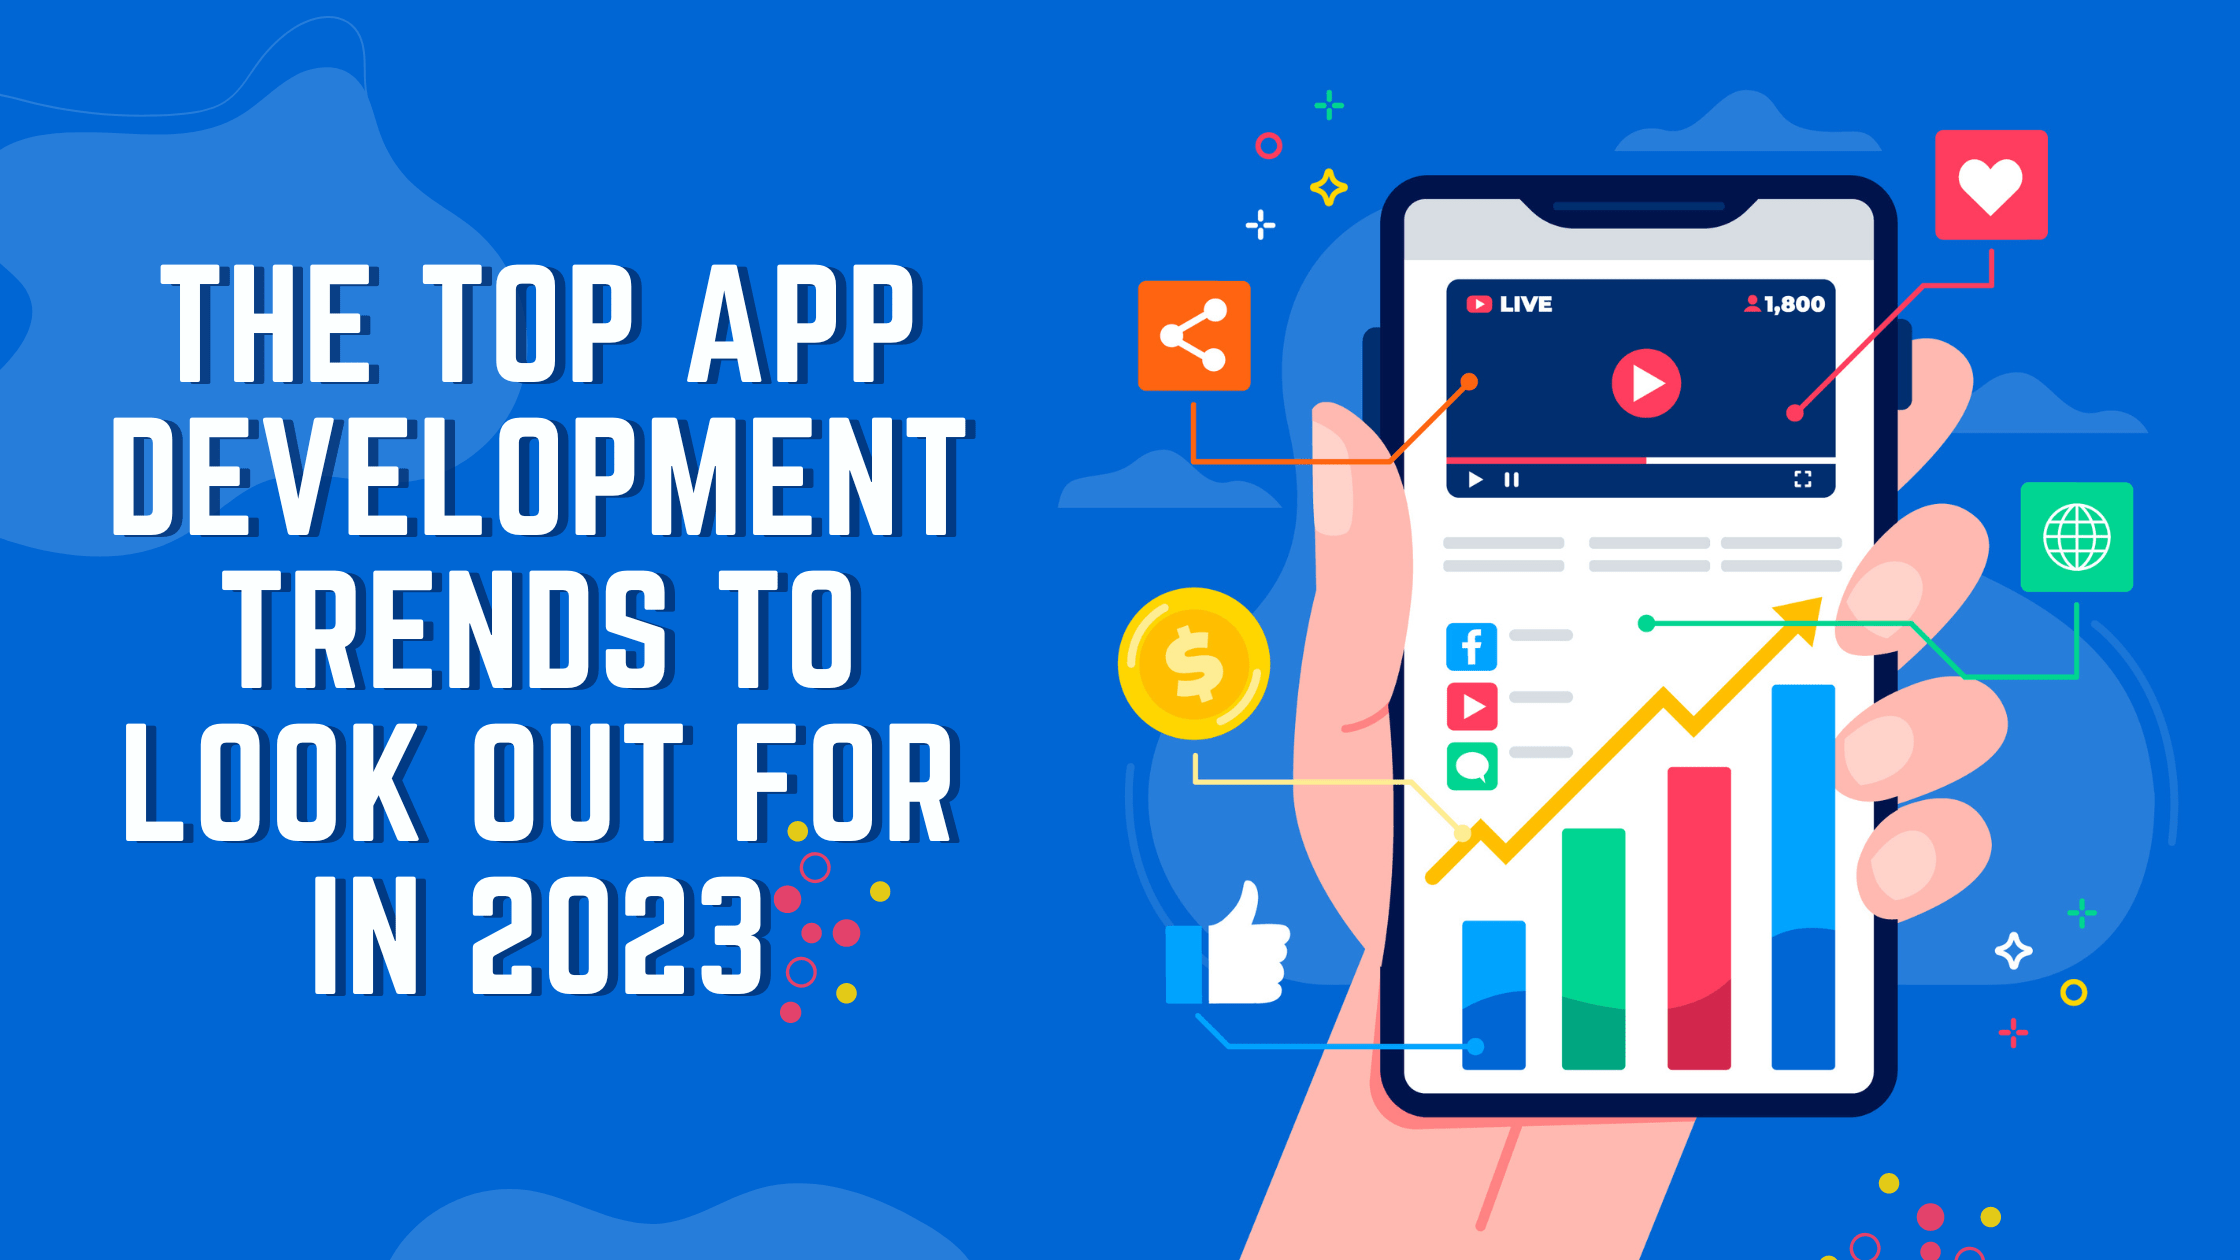 THE TOP APP DEVELOPMENT TRENDS TO LOOK OUT FOR IN 2023